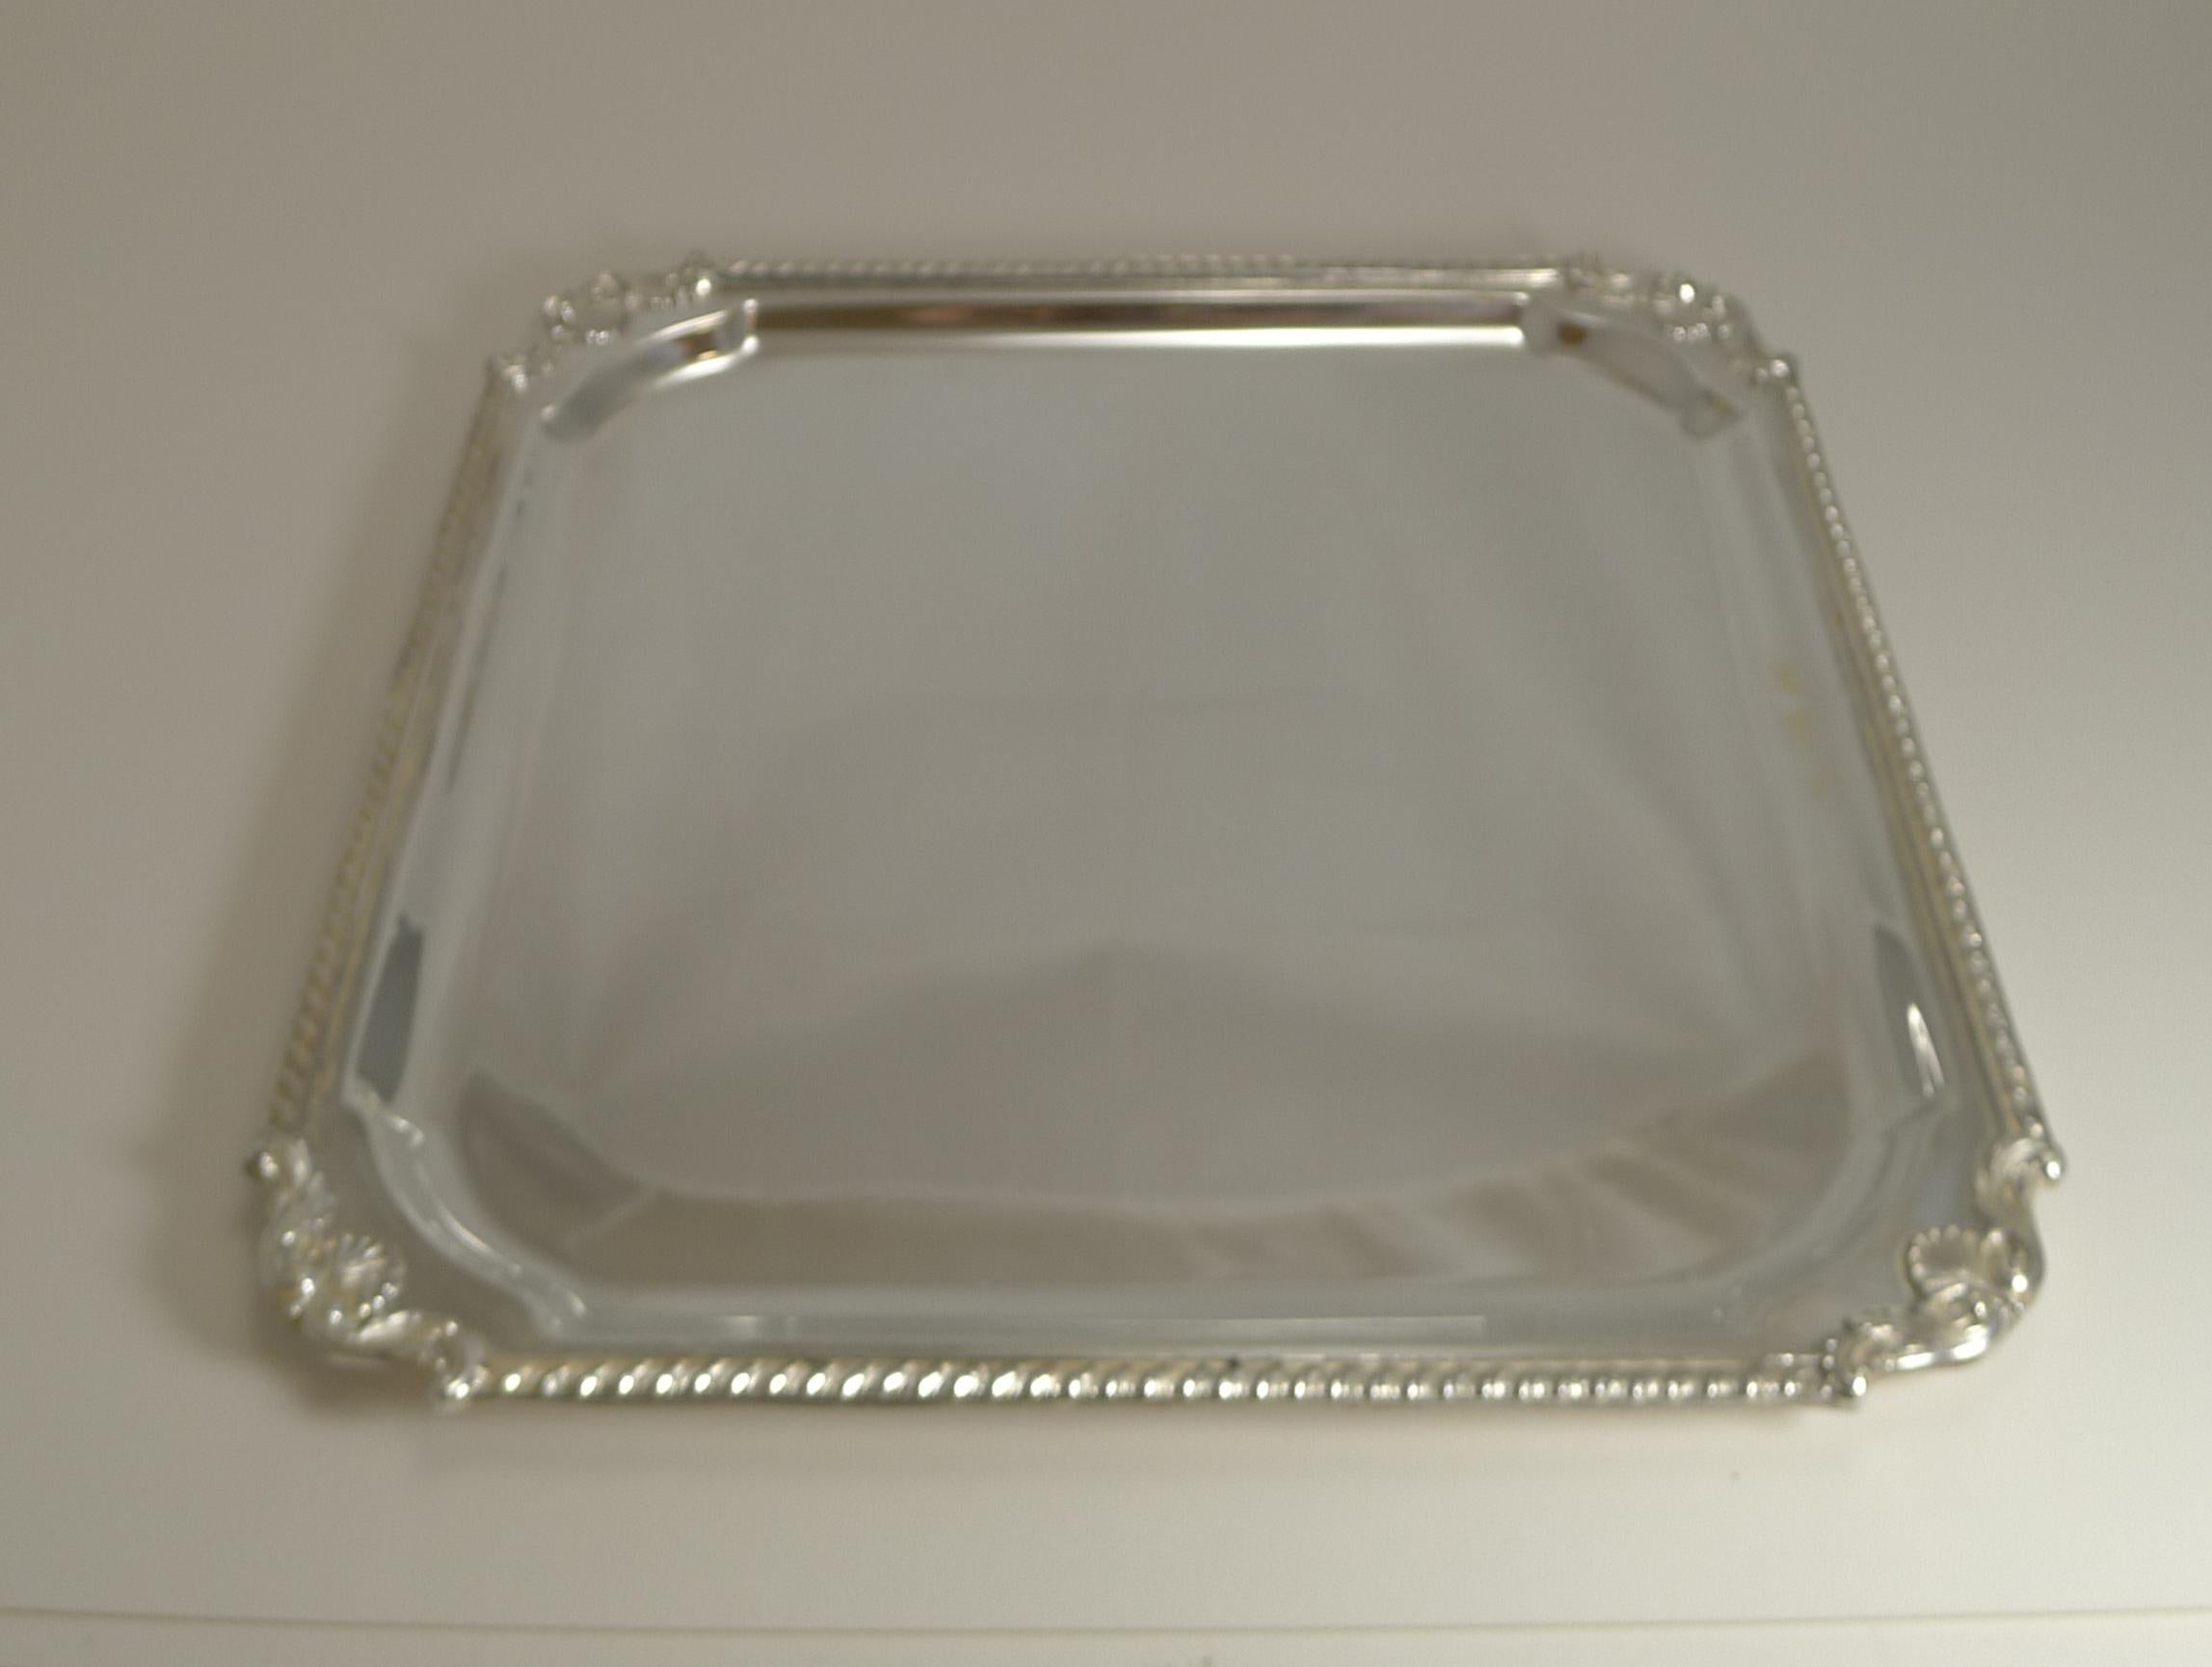 A very smart antique English square drinks tray or salver with a decorative raised border.

The underside is fully marked for the top-notch silversmith, Mappin & Webb. Dating to circa 1900, it remains in excellent condition.

A good large size